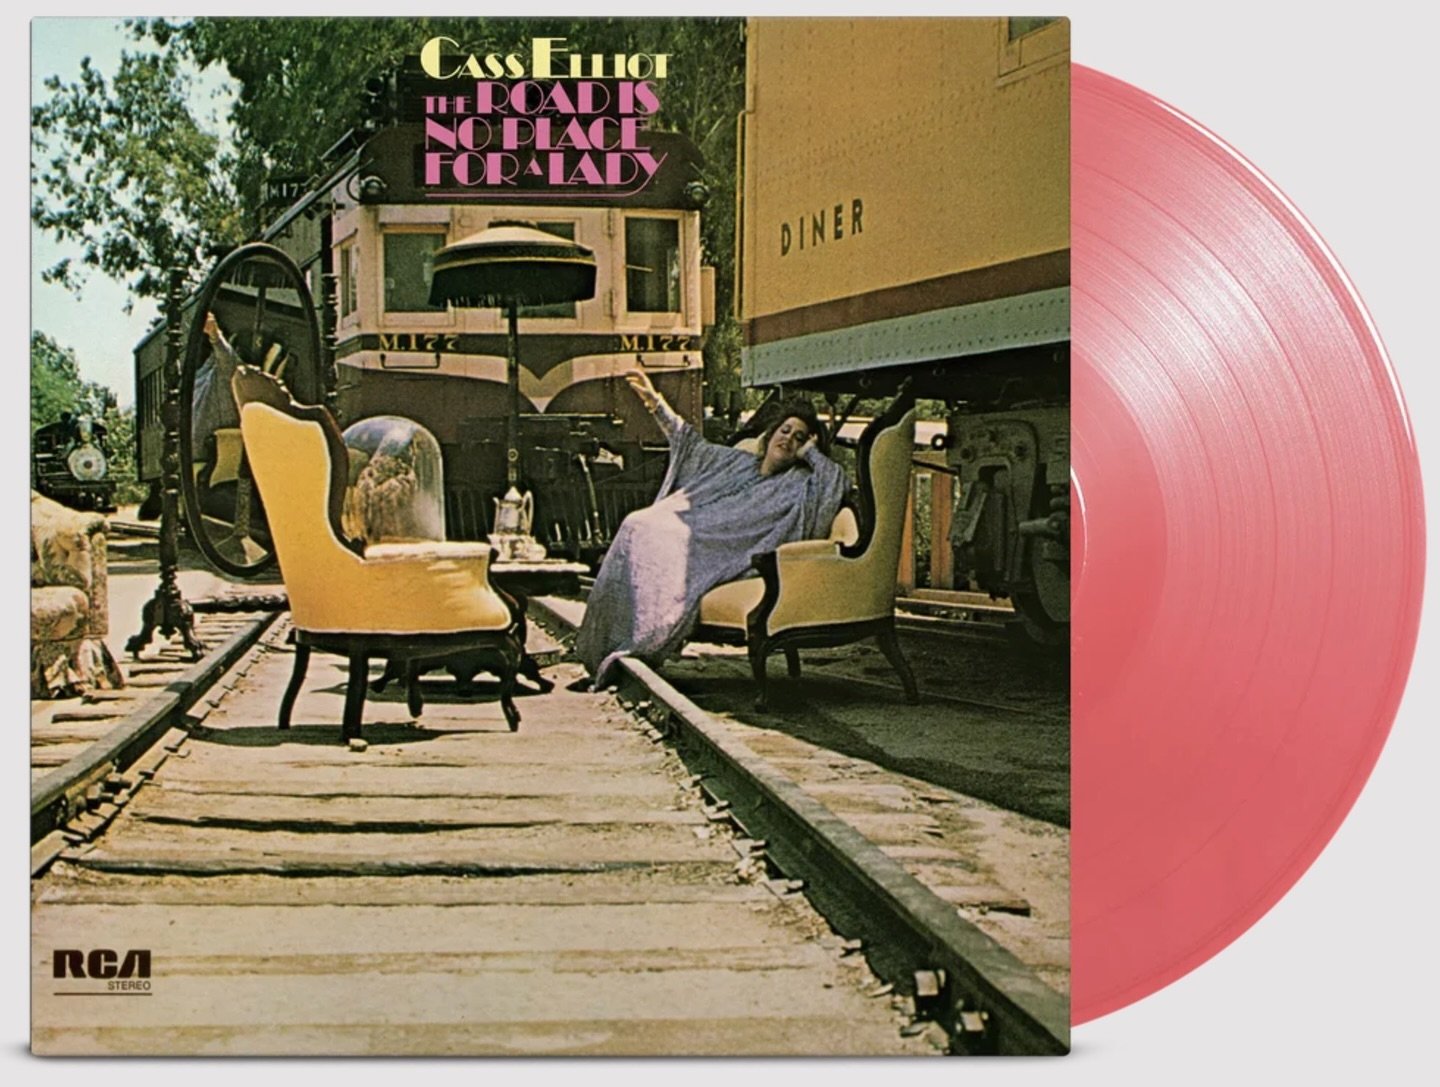 Today&rsquo;s the day!

For the first time in decades, three of Cass&rsquo; iconic albums are now available on vinyl via @musiconvinyl. 

Limited-edition copies of DON&rsquo;T CALL ME MAMA ANYMORE, CASS ELLIOT and THE ROAD IS NO PLACE FOR A LADY are 